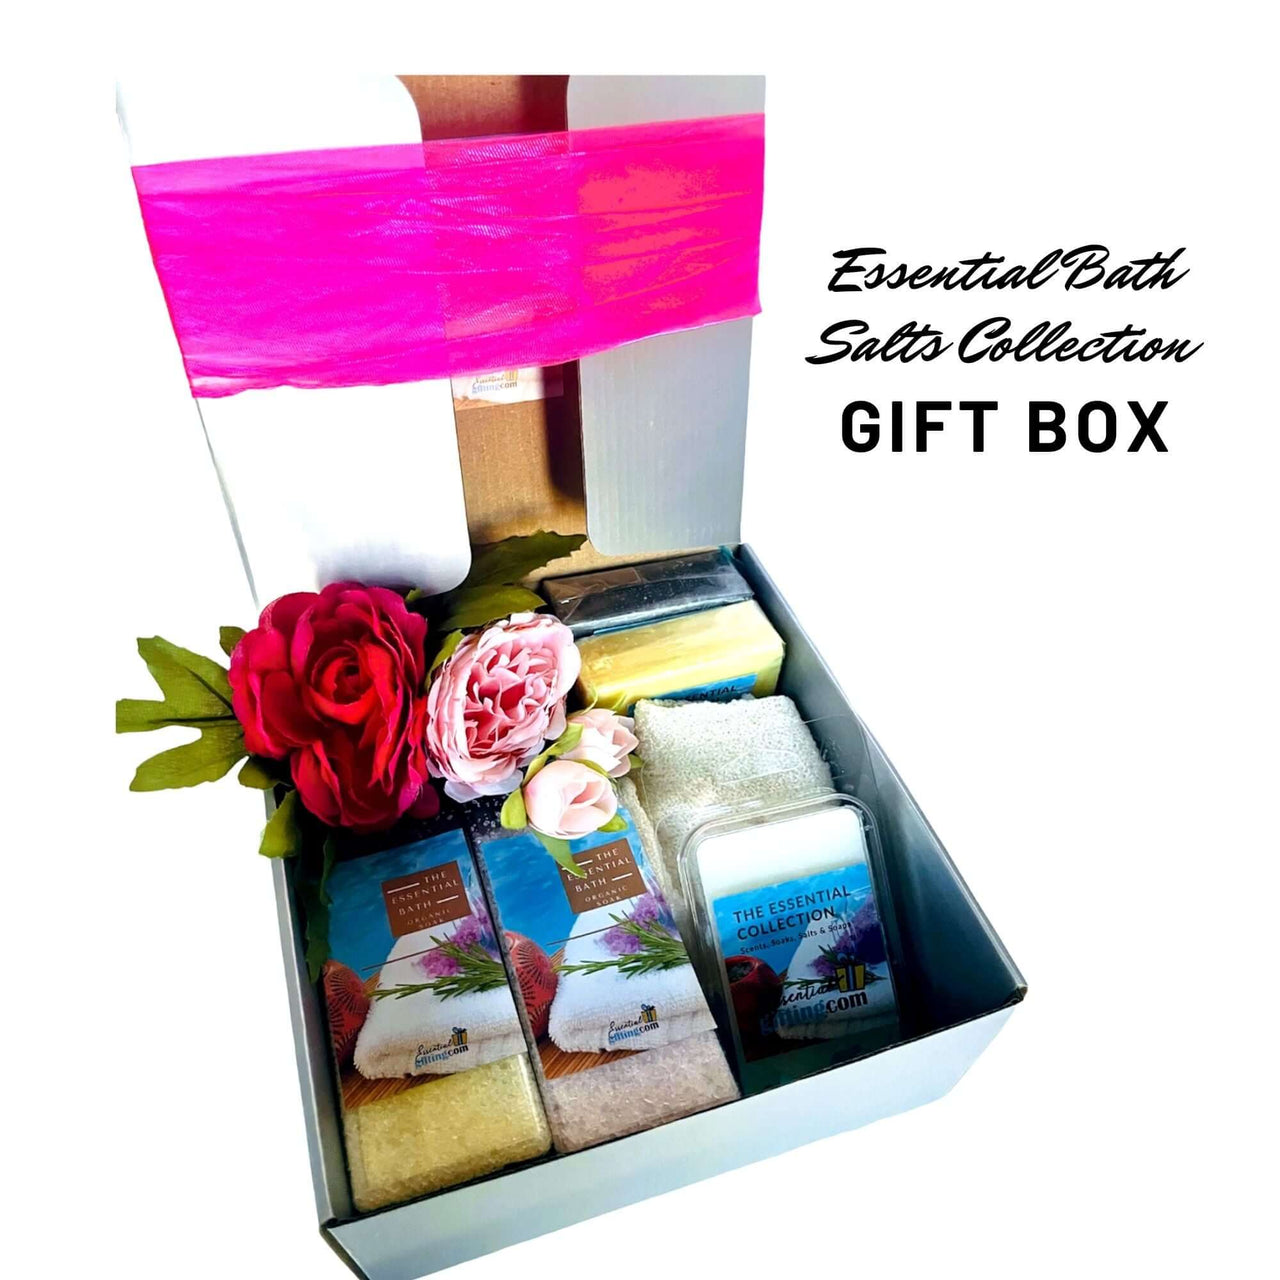 Essential Bath Salts Collection Gift Box - Artisan-crafted bath essentials including scented salts, soaps, and rose flowers in a luxurious gift set.